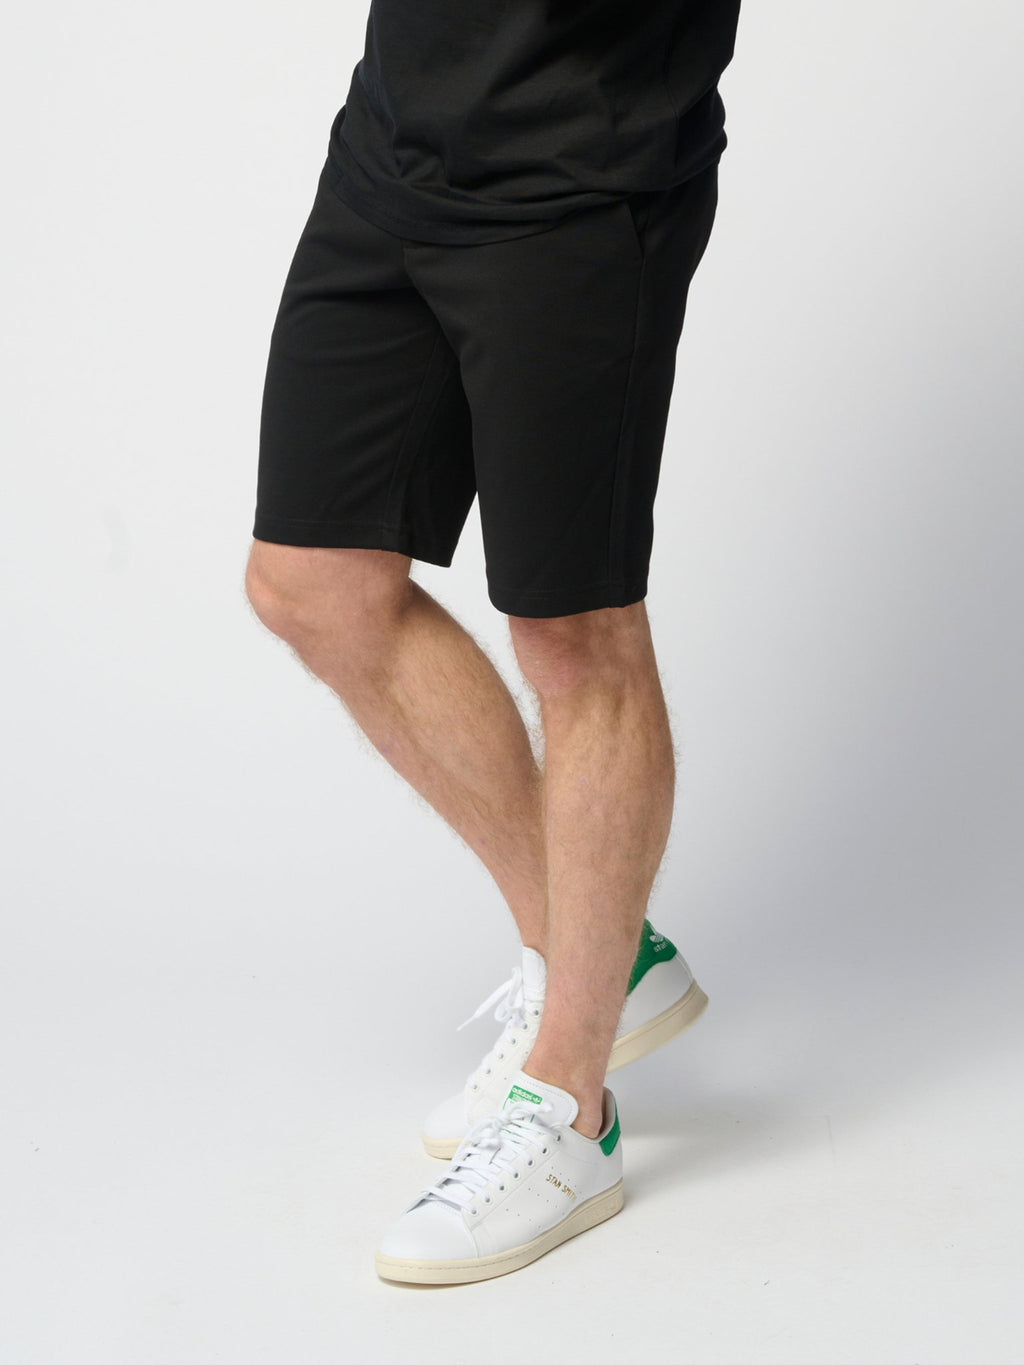 Performance Shorts – Package Deal (3 pcs.)